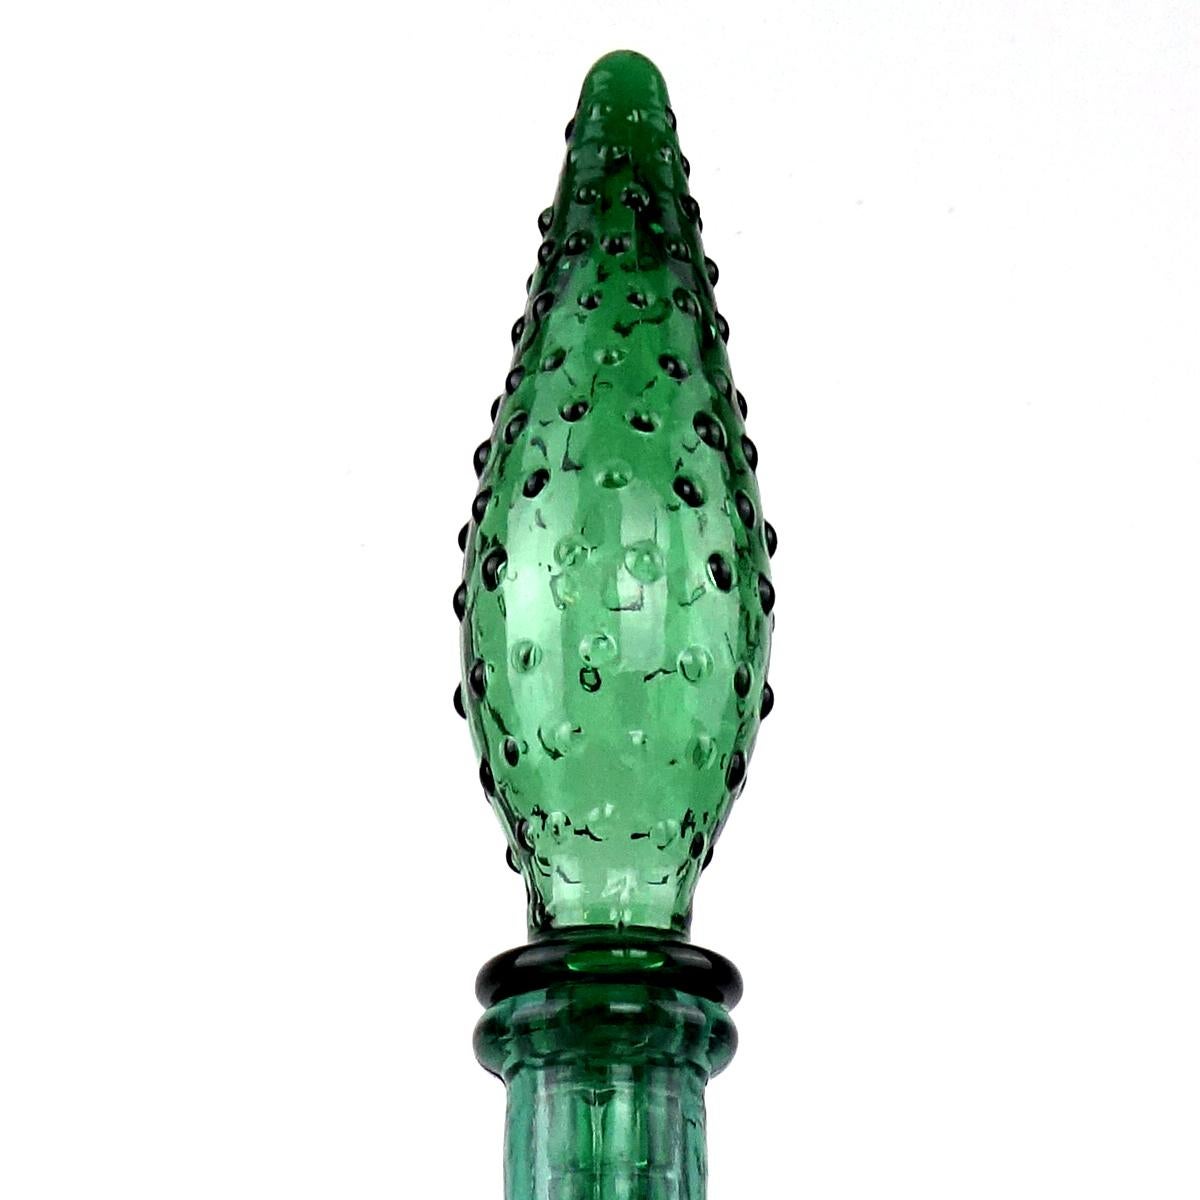 Sleek midcentury green glass decanter with stopper.
The design by Empoli is called Genie.